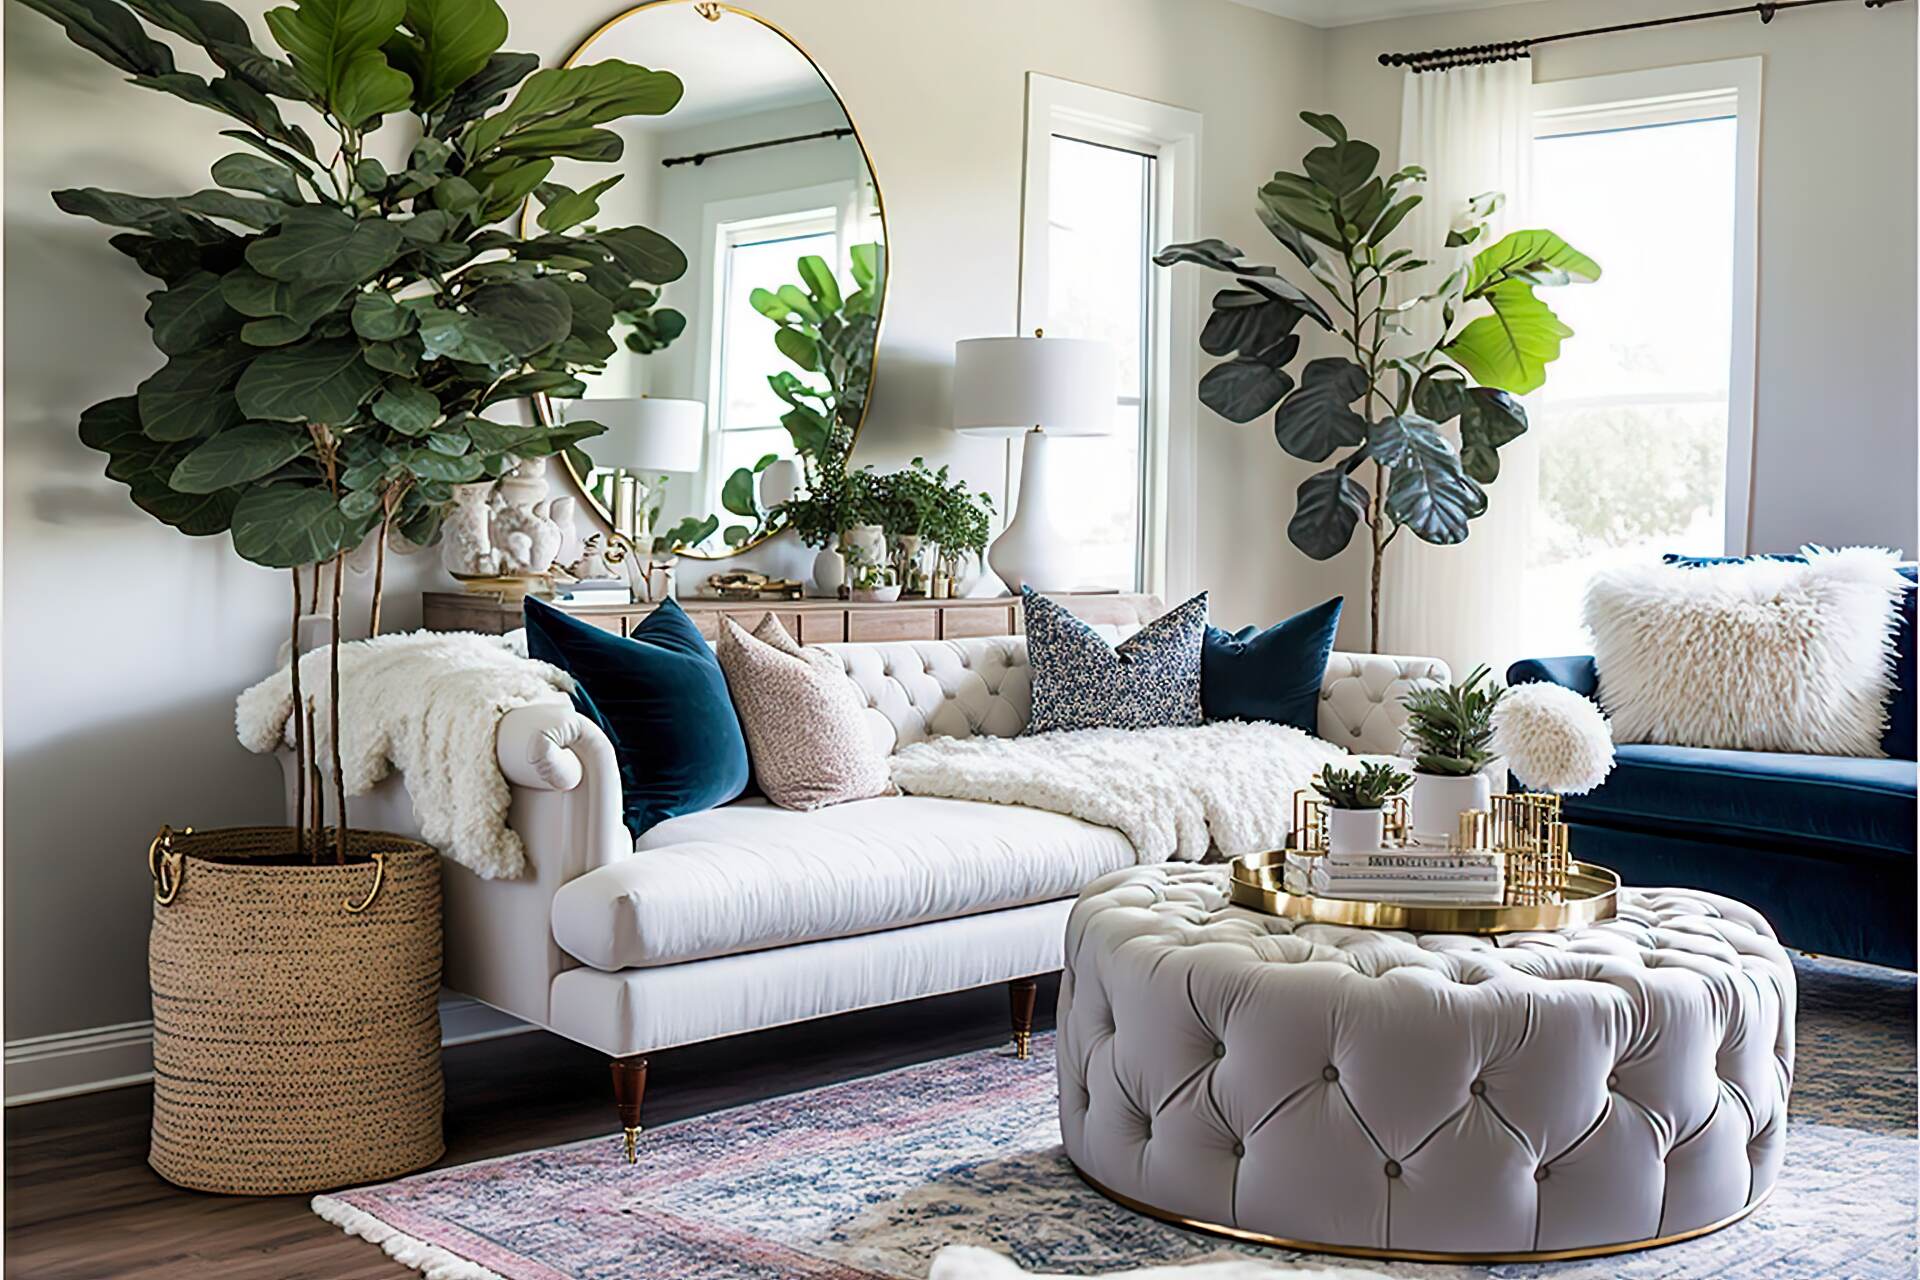 This Bohemian Living Room Is All About Laid-Back Luxury. A Plush White Shag Rug Anchors The Space, While A Mix Of Vintage And Modern Furniture Pieces, Including A Tufted Velvet Sofa And A Mid-Century Inspired Coffee Table, Add A Sense Of Effortless Elegance. A Gallery Wall Of Eclectic Art And A Large Fiddle Leaf Fig Tree Add The Finishing Touches To This Relaxed Yet Refined Space.